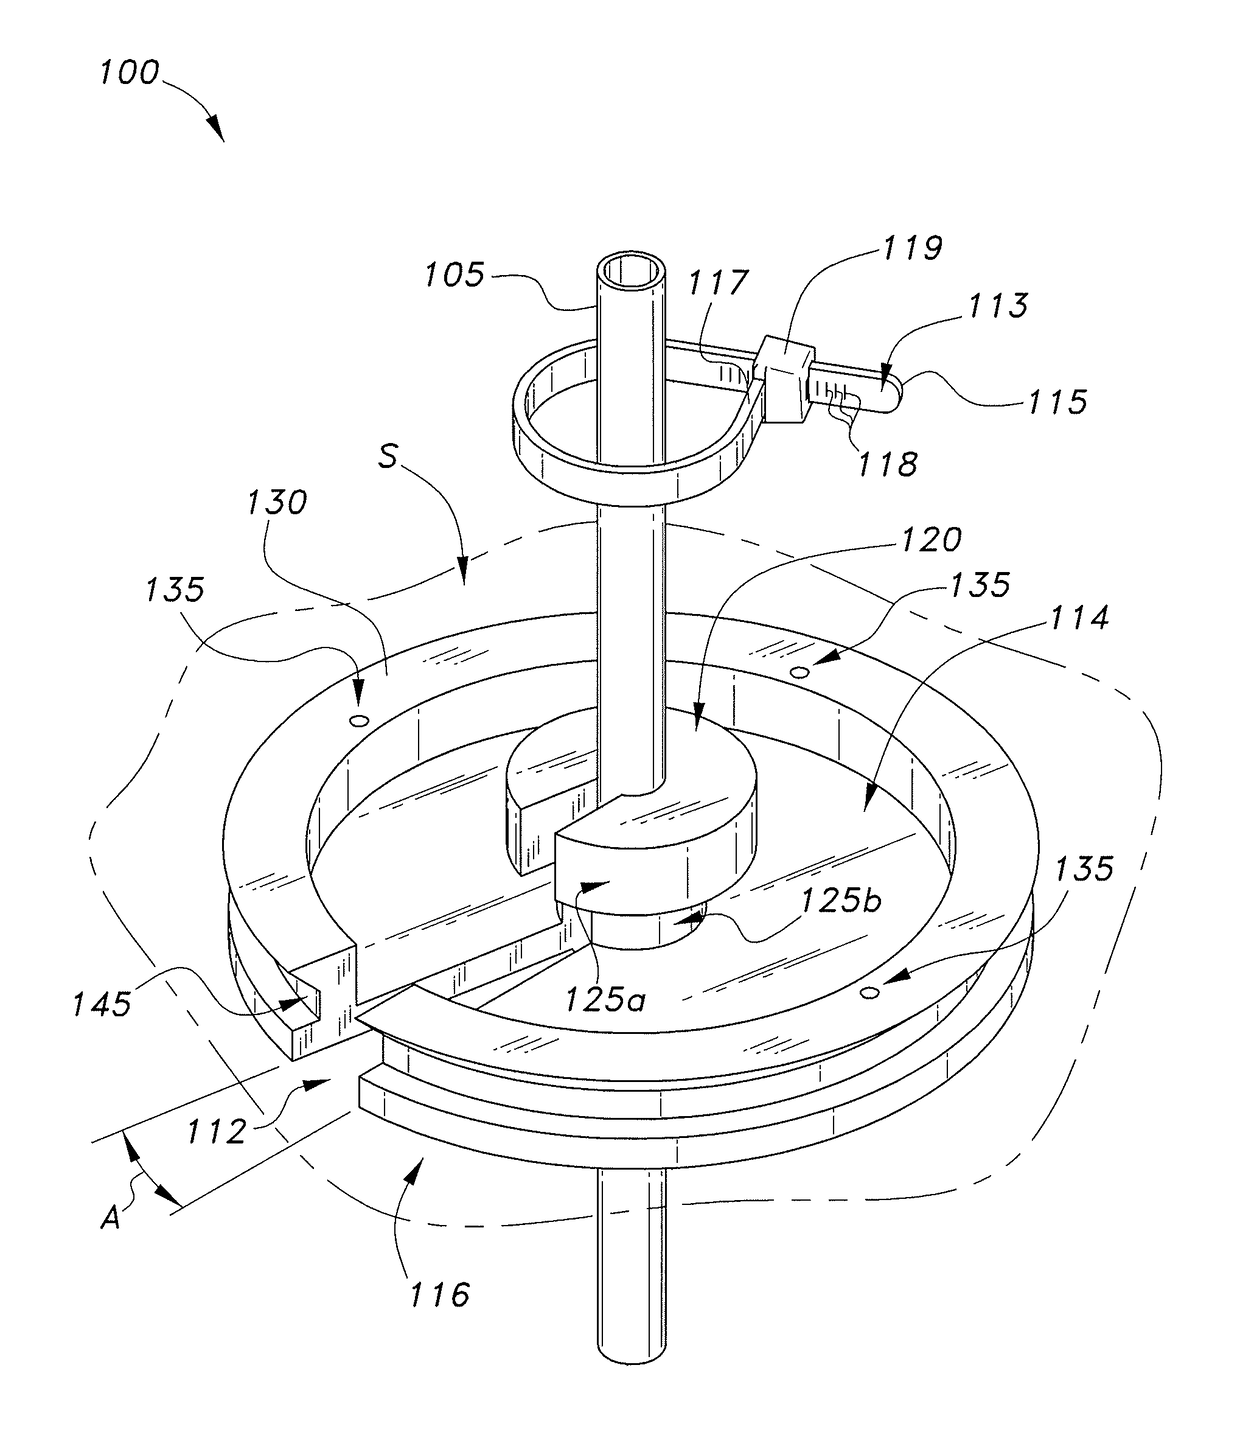 Surgical drain anchoring device